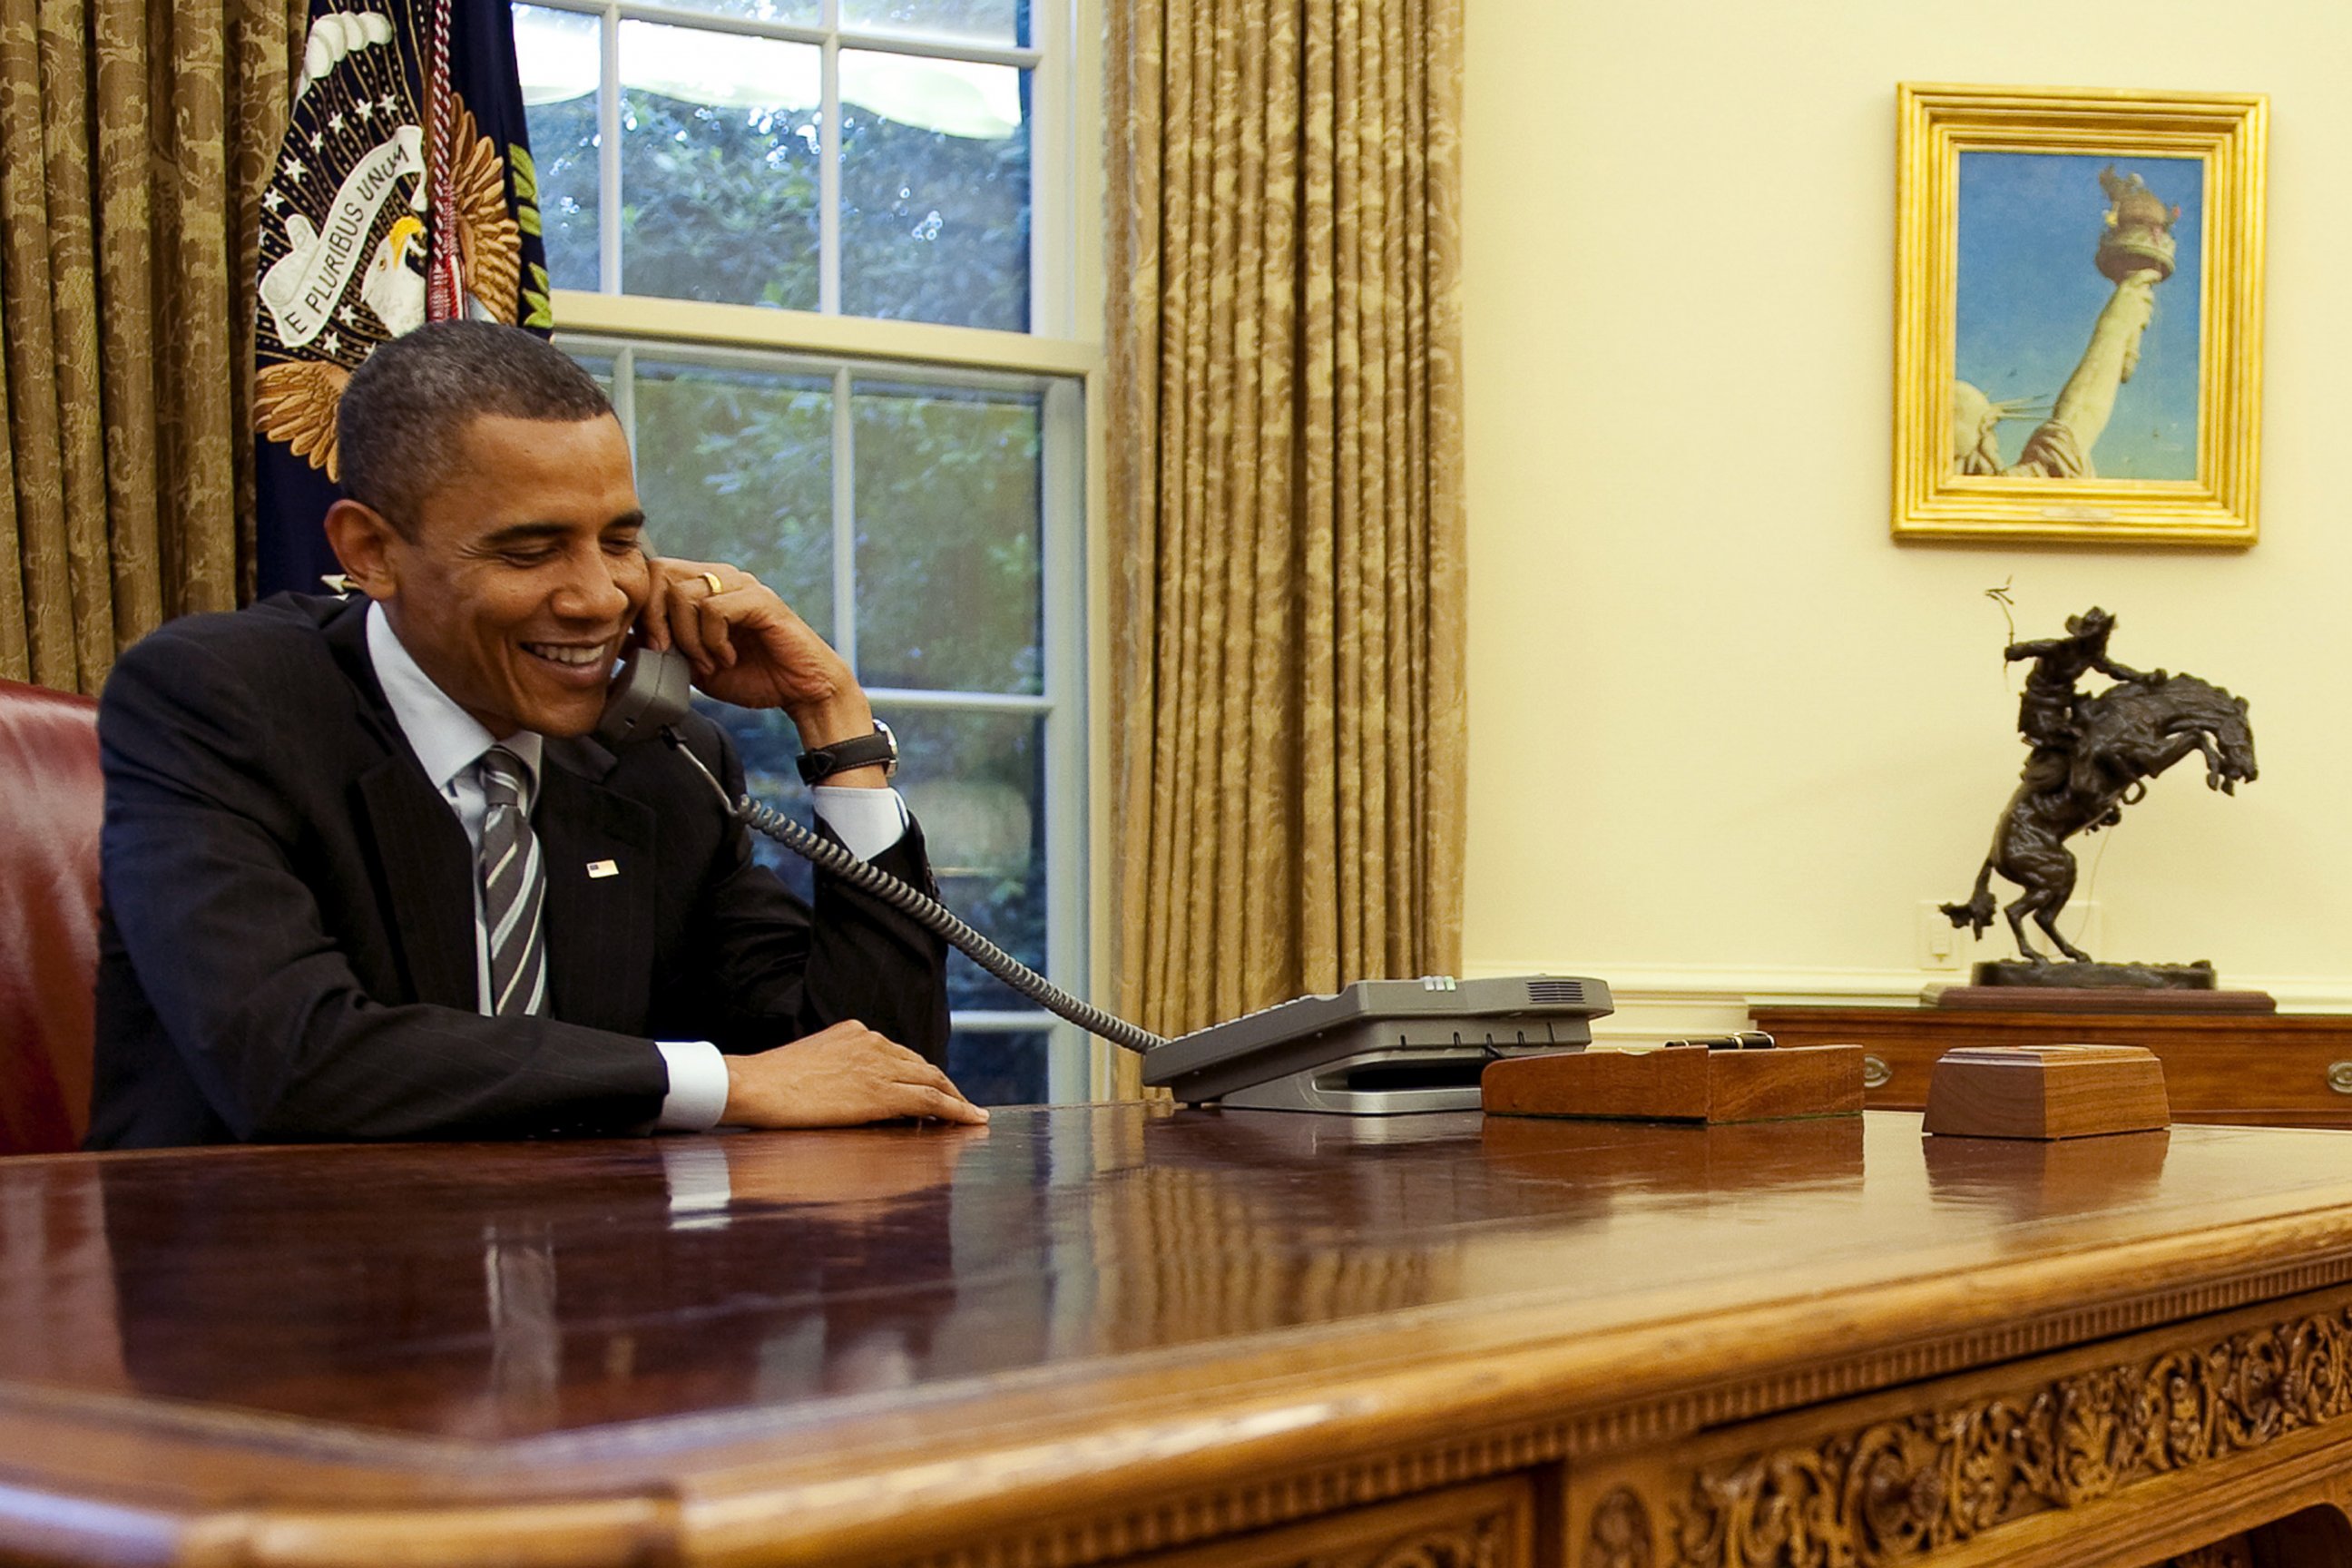 PHOTO: In this file photo, President Barack Obama speaks on the phone in the Oval Office.     